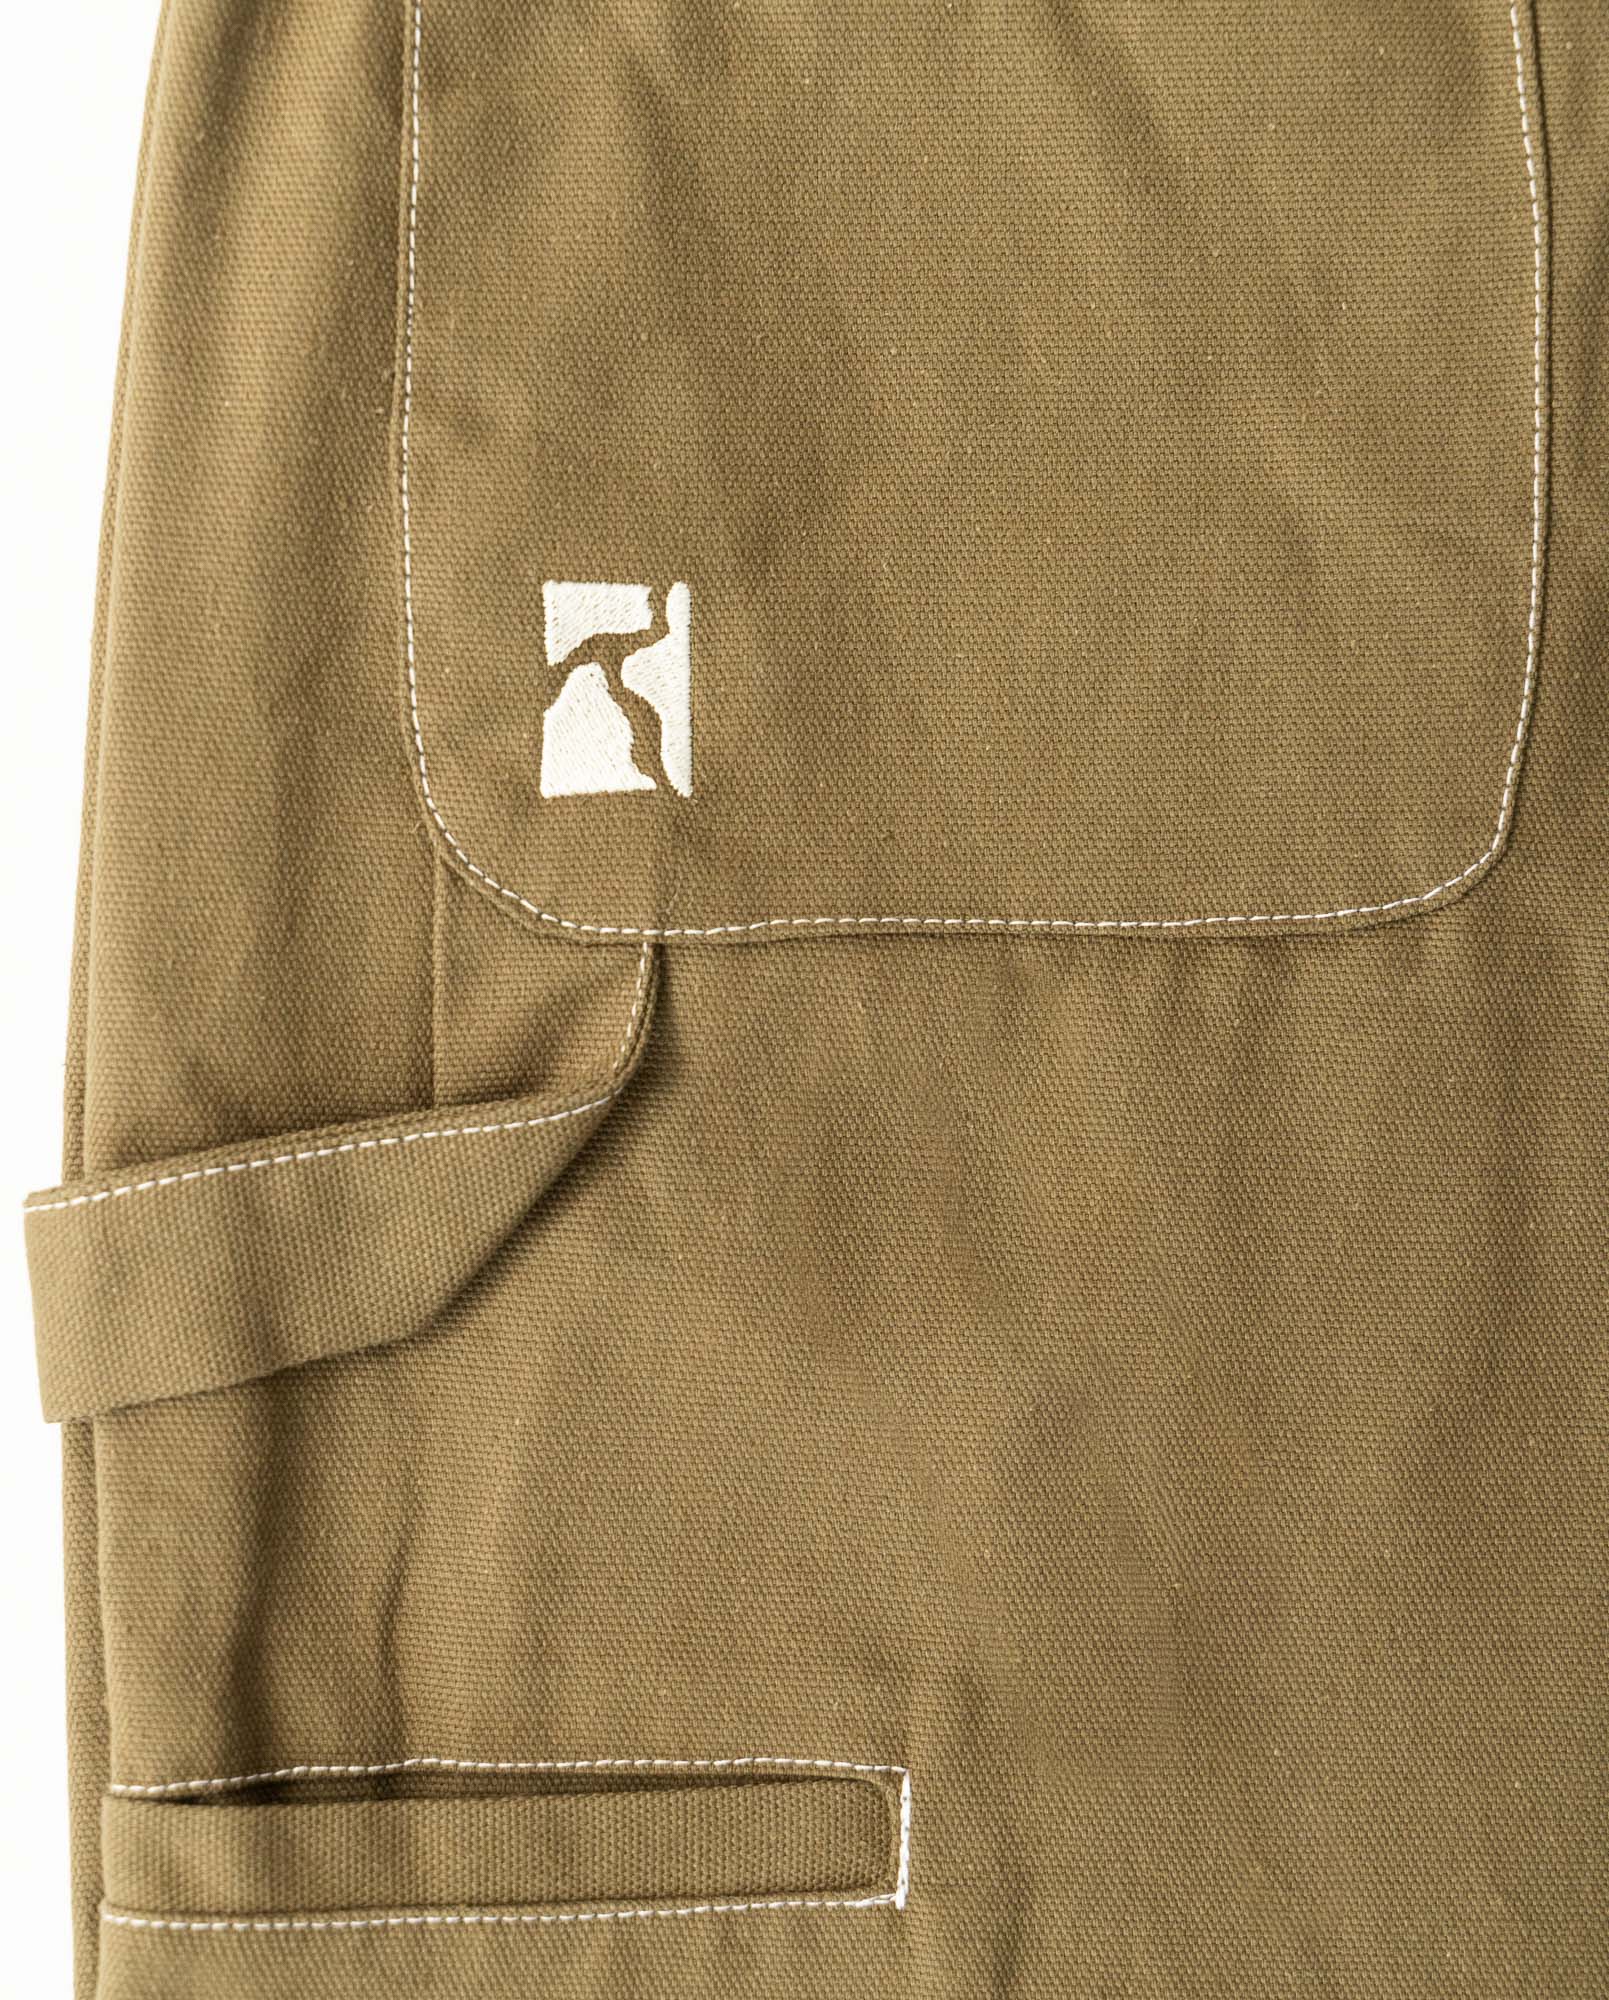 Poetic Collective - Sculptor pants / Canvas – Olive